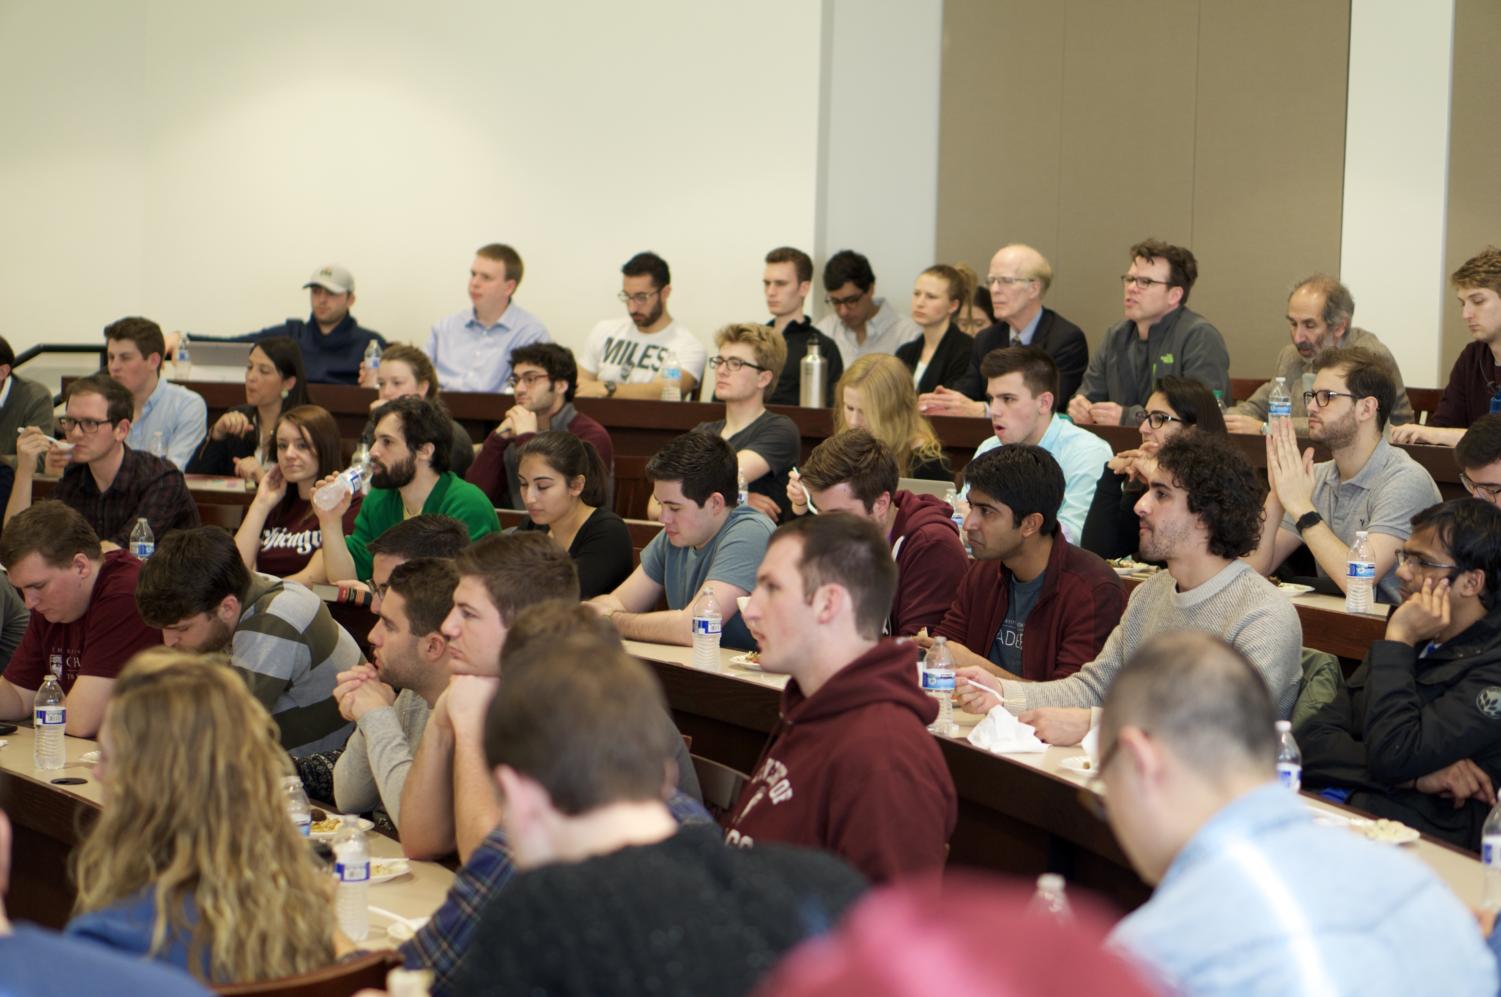 Students listen to professors discuss the future of the Supreme Court in a packed room at the University of Chicago Law School.